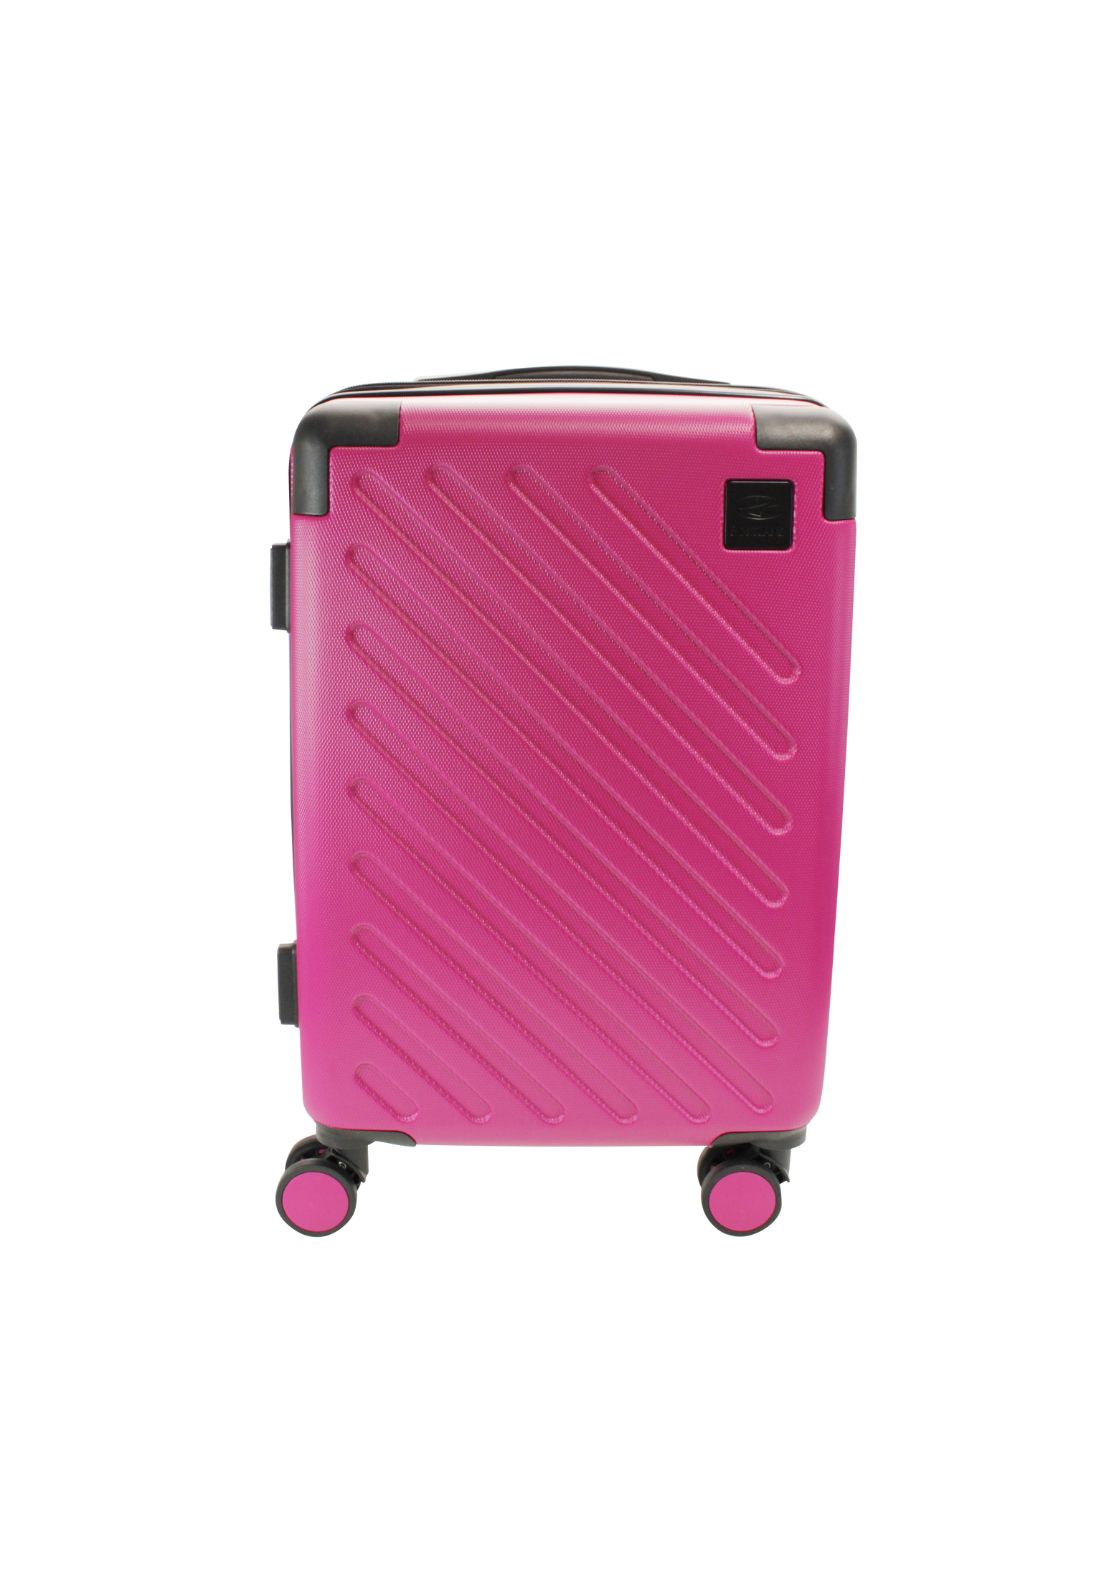 Portland Tokyo Hard Shell Cabin Luggage - Pink 1 Shaws Department Stores